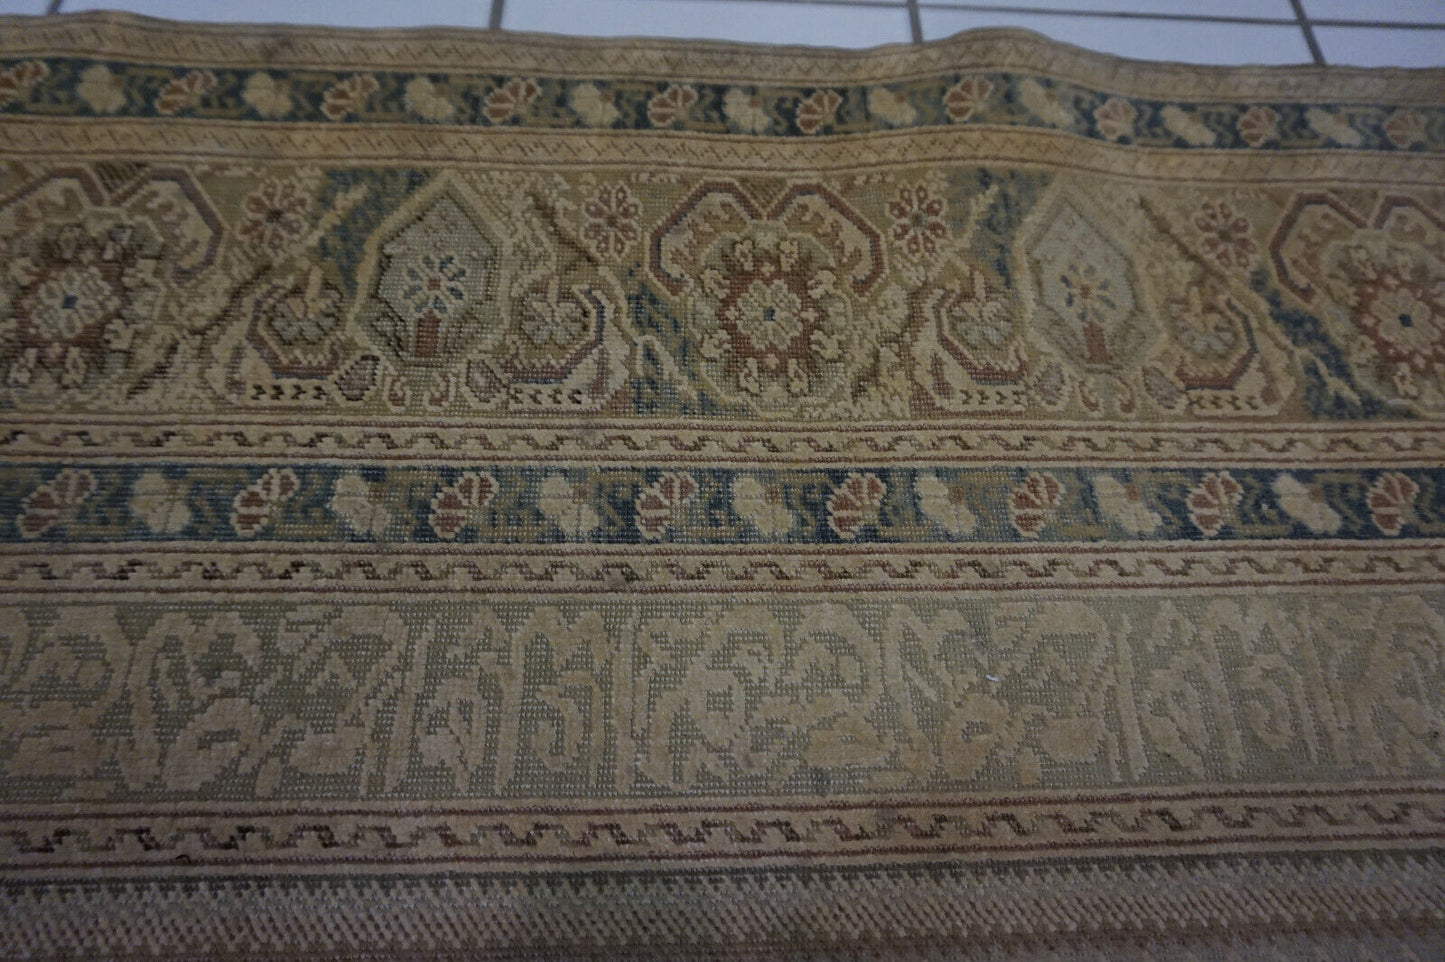 Close-up of the intricate motifs and low pile texture on the Turkish Transilvania prayer rug